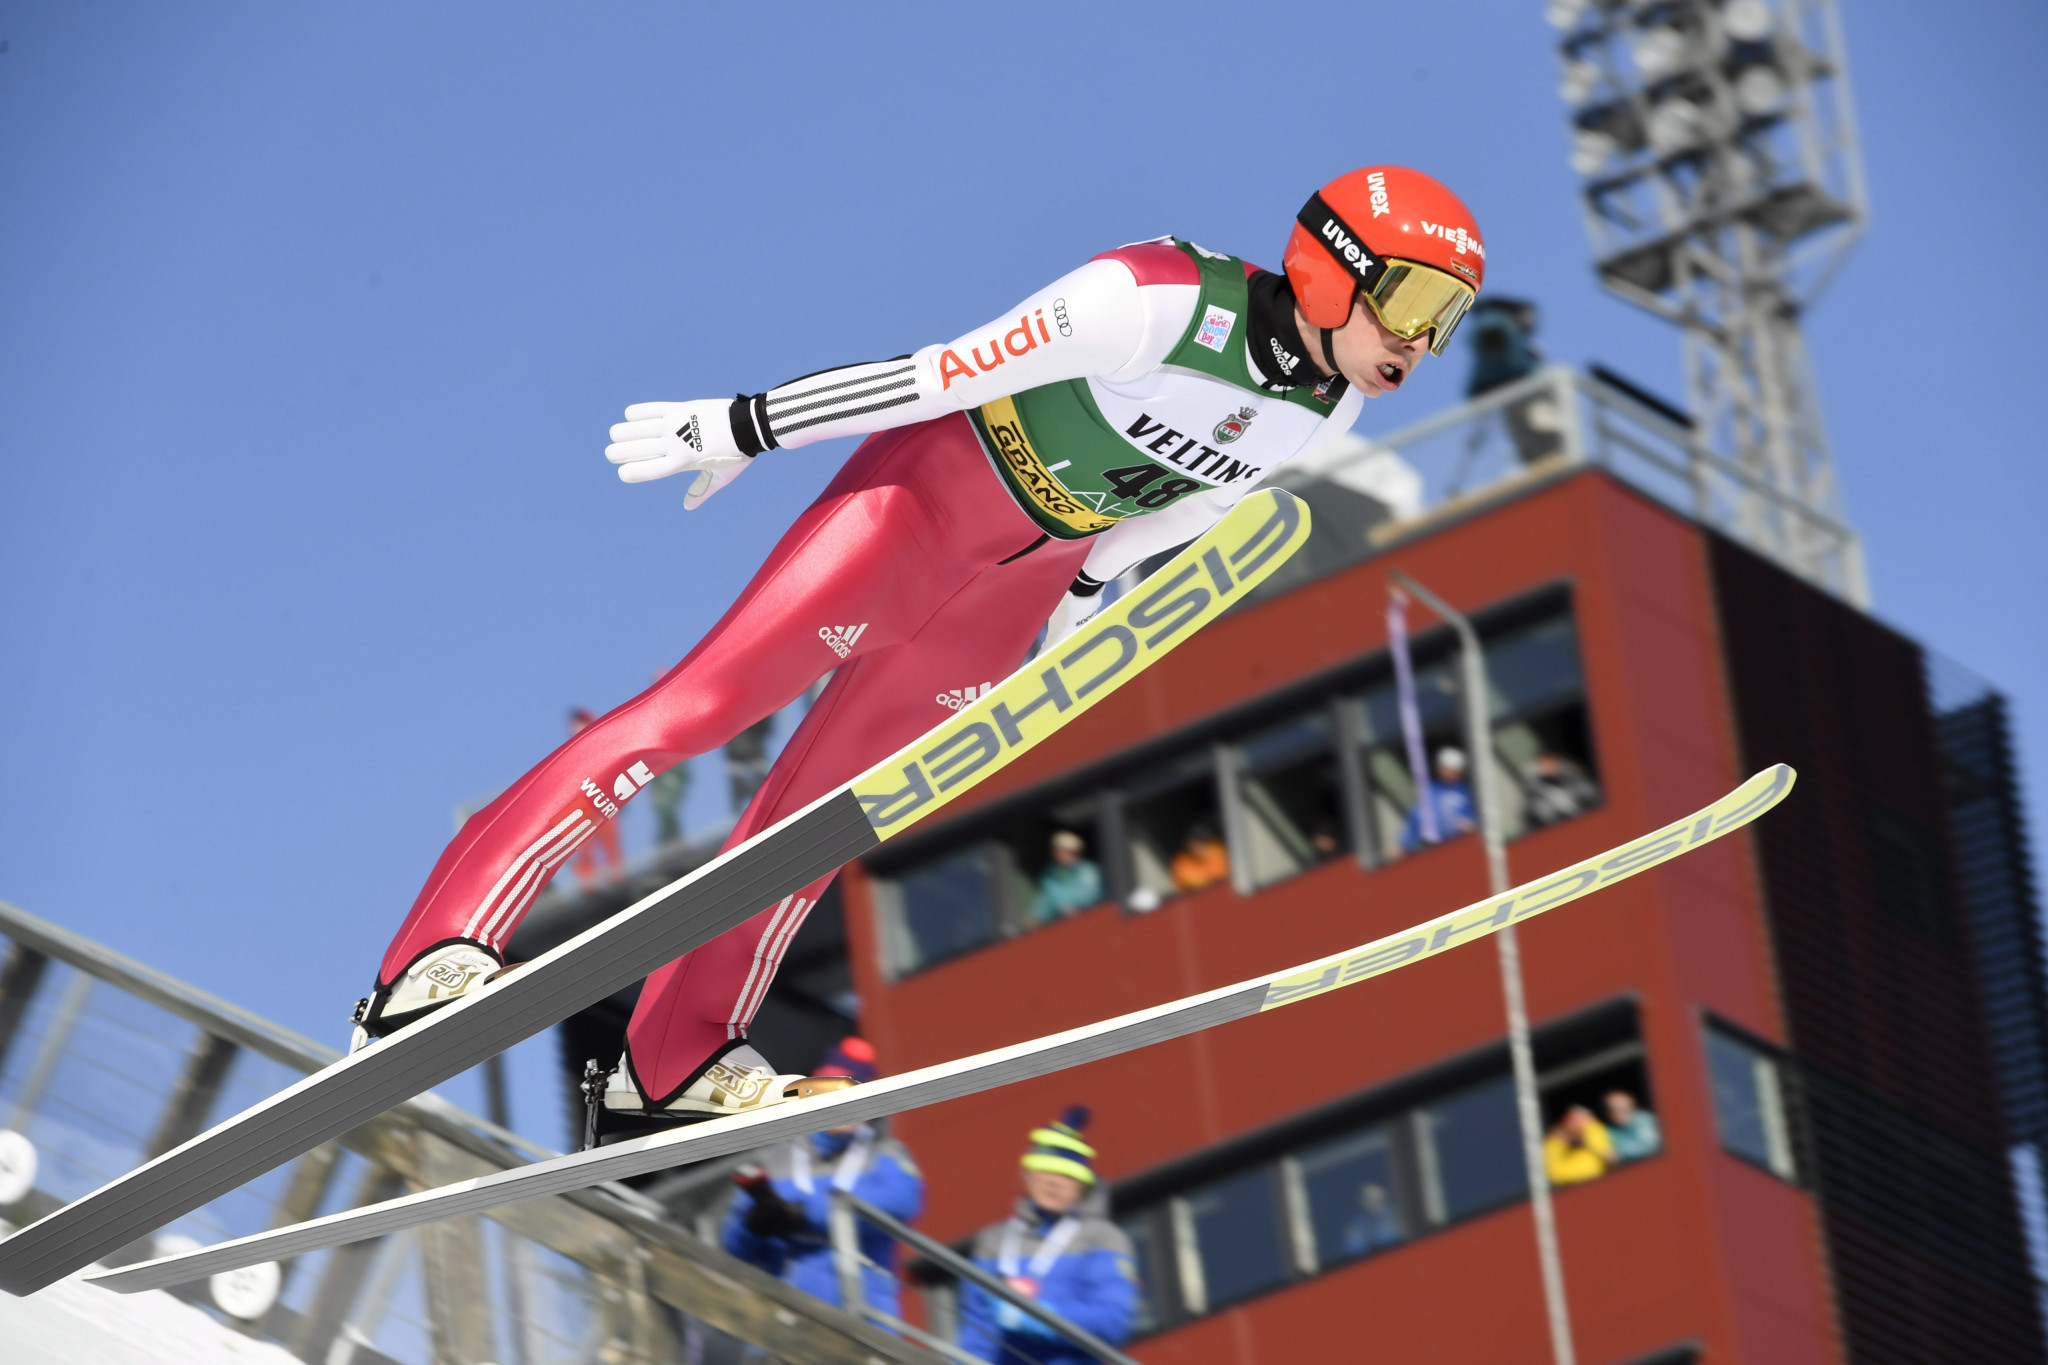 Frenzel wins thriller against Watabe at Nordic Combined World Cup